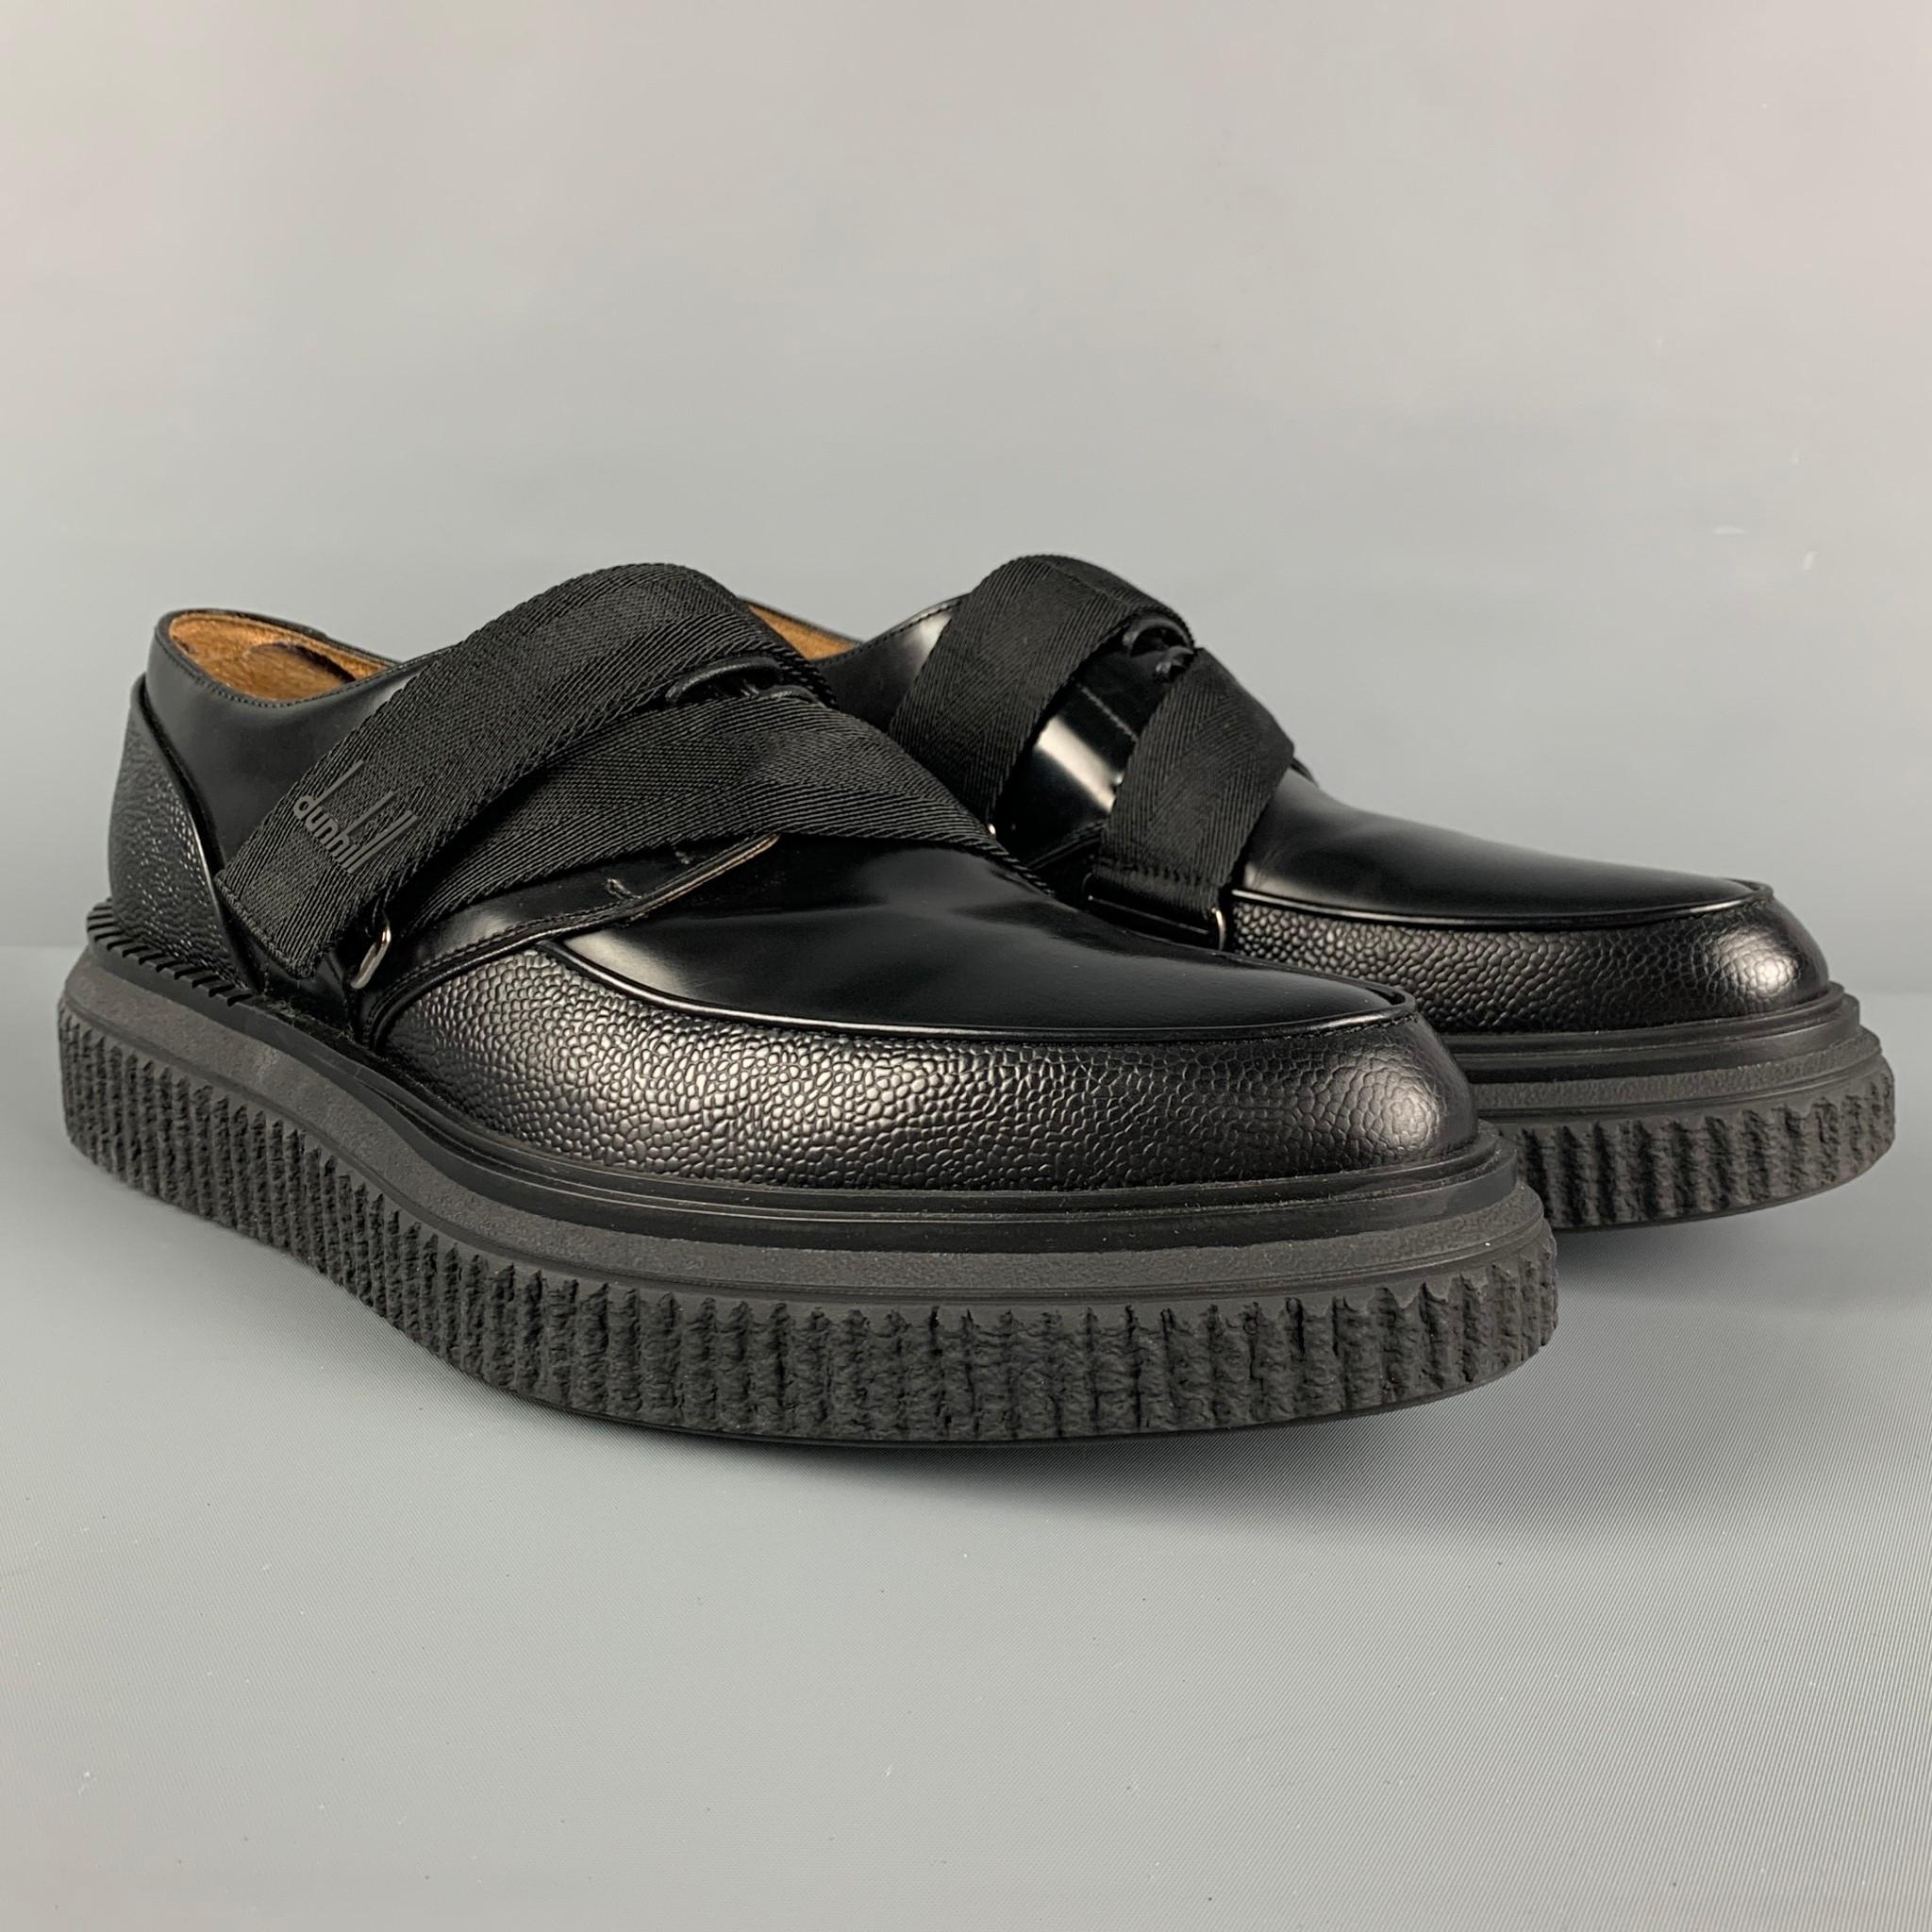 DUNHILL lace up shoes comes in a black leather featuring a creeper style, pointed toe, hook & loop detail, rubber sole, and a lace up closure. Made in Italy. 

New With Box.
Marked: 42
Original Retail price: $895.00

Outsole: 12.5 in. x 4.5 in. 